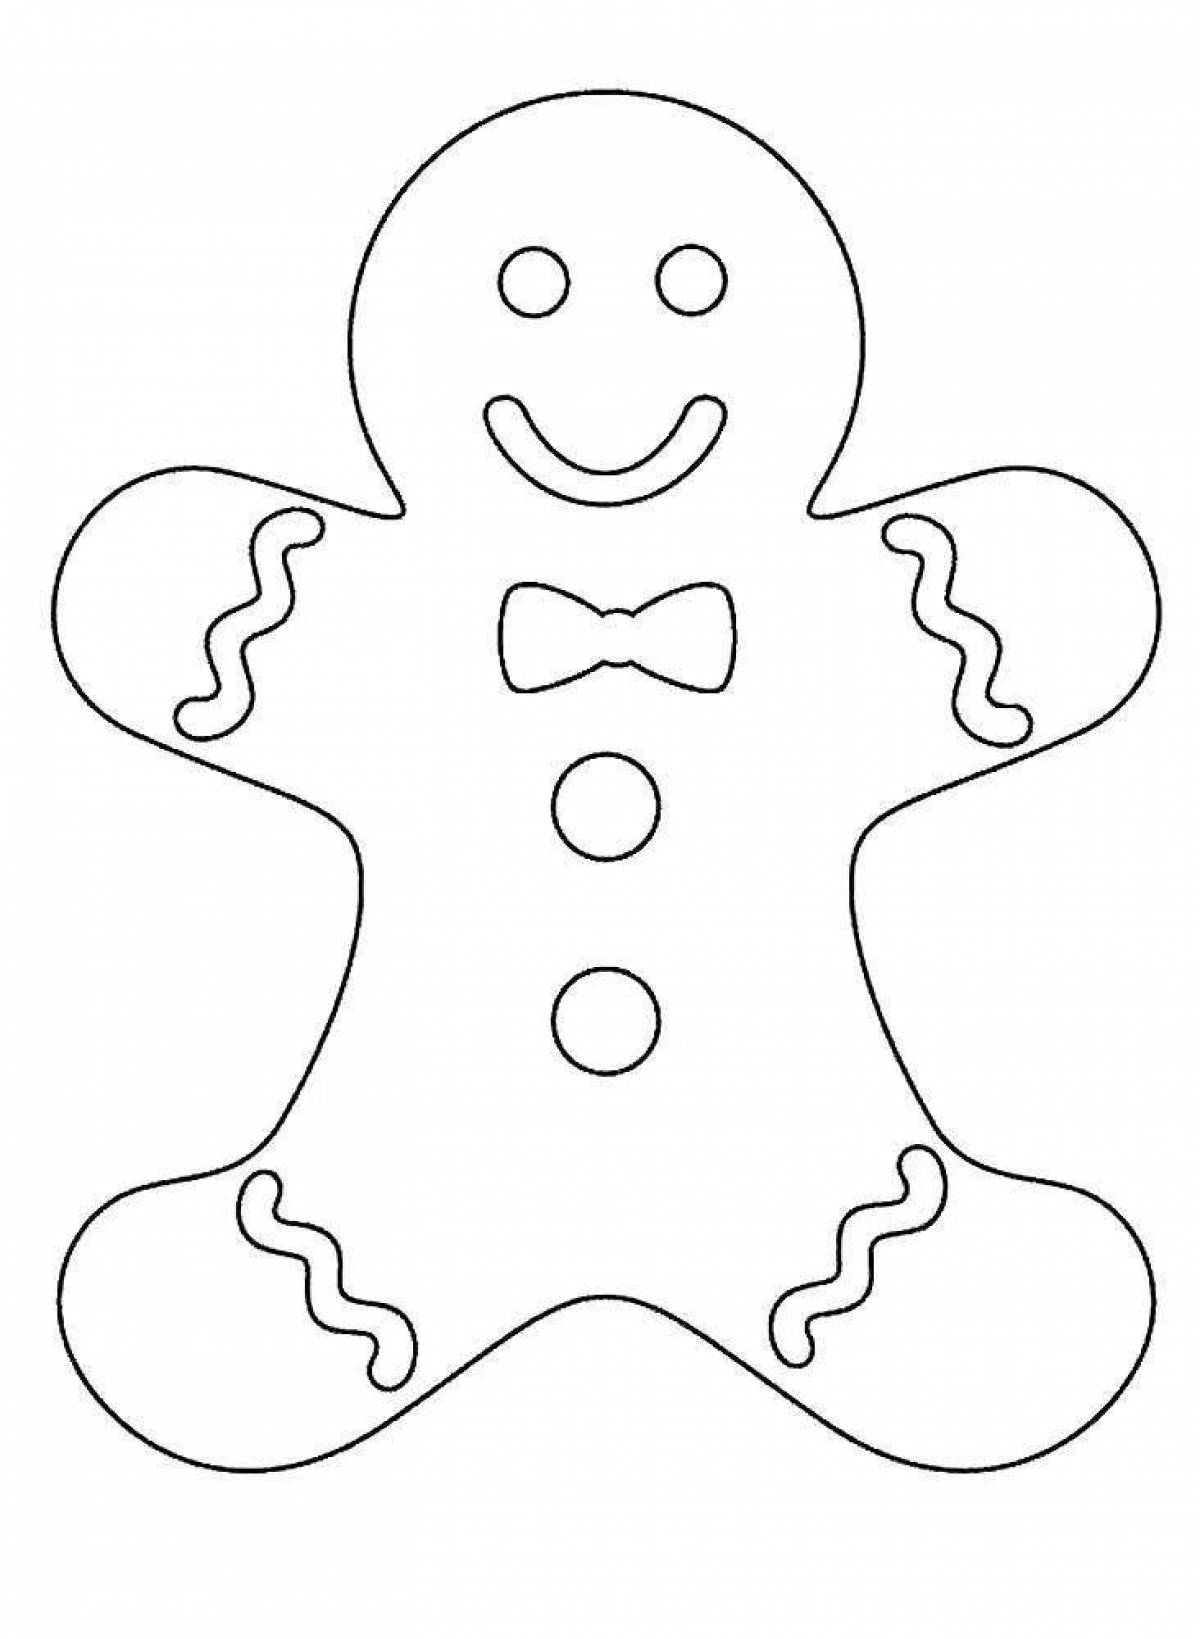 Attractive gingerbread coloring page